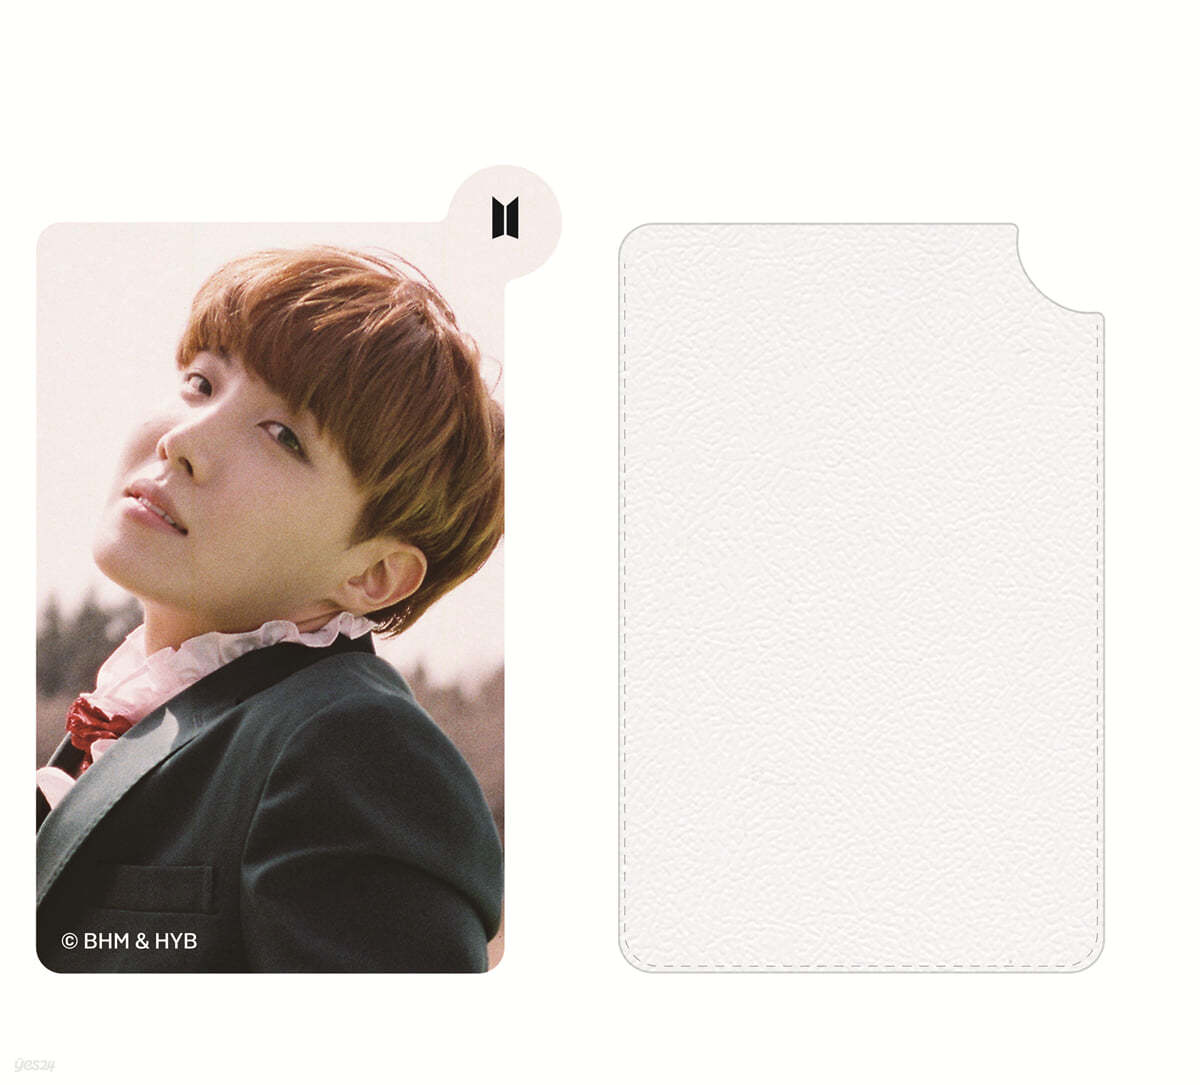 [BTS - 화양연화 Young Forever] LENTI HAND MIRROR [JHOPE ver.]